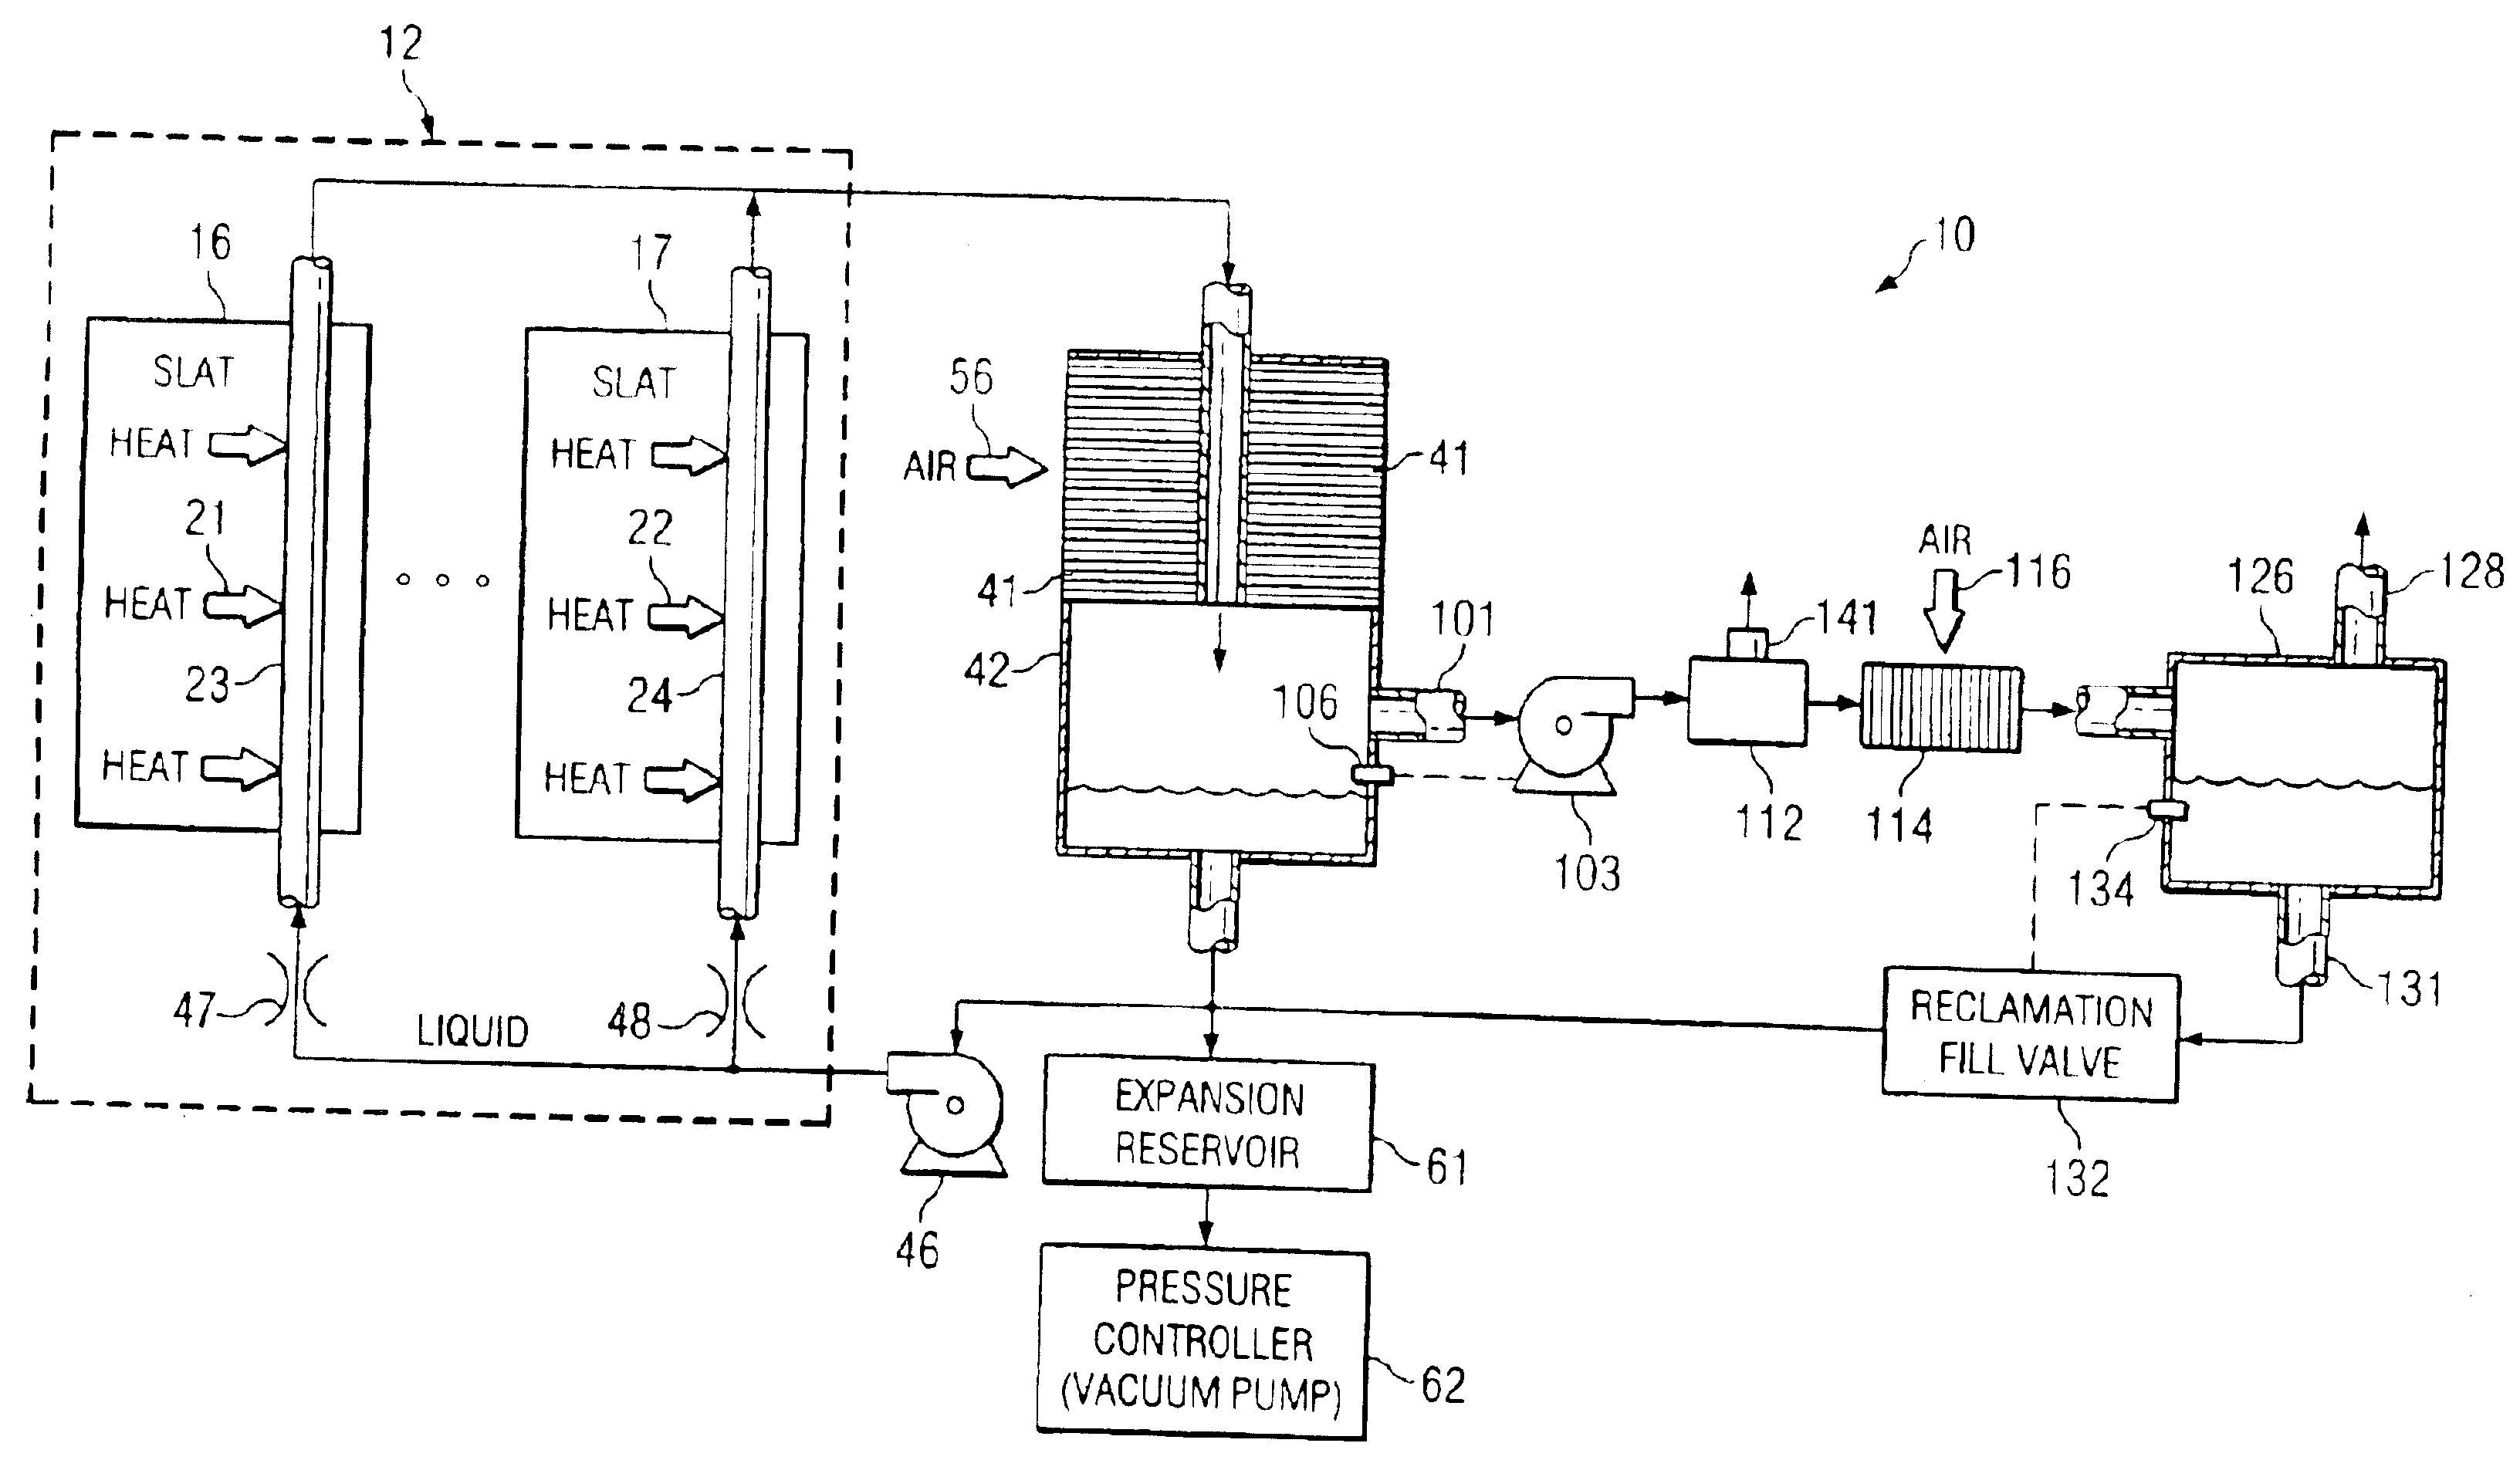 Method and apparatus for extracting non-condensable gases in a cooling system